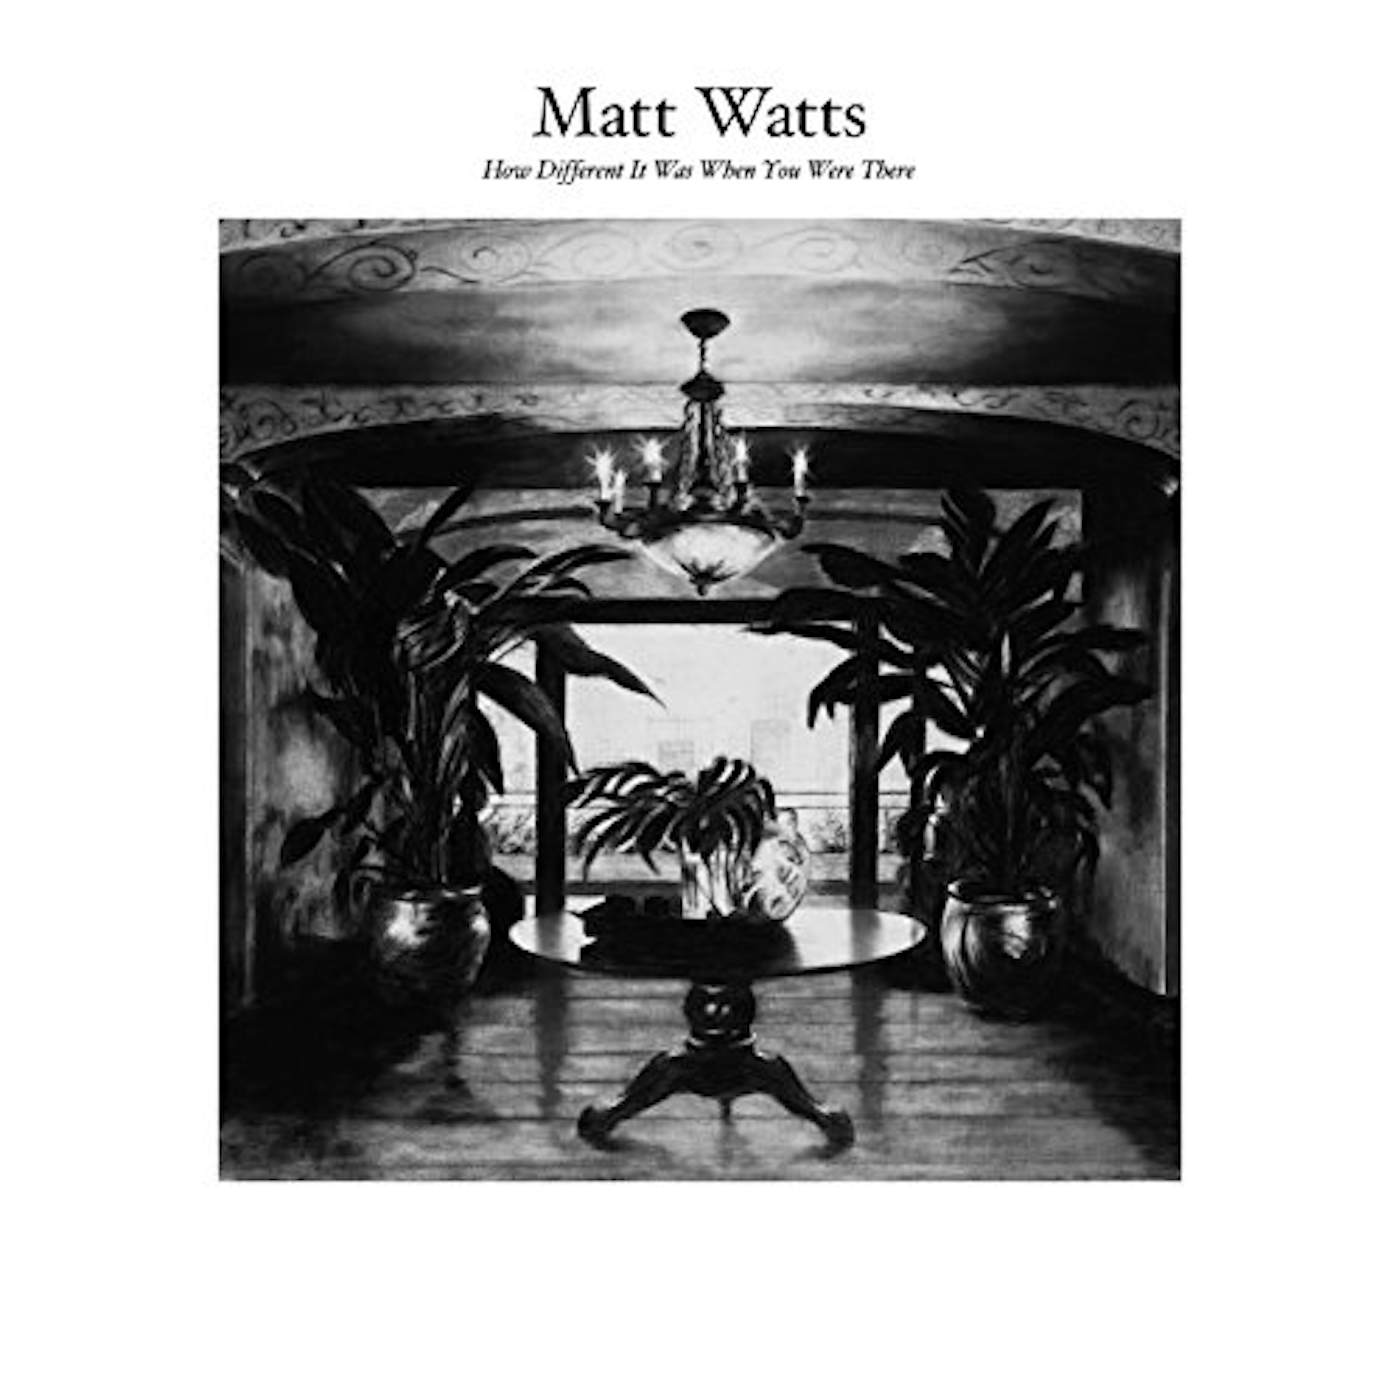 Matt Watts HOW DIFFERENT IT WAS WHEN YOU WERE THERE CD